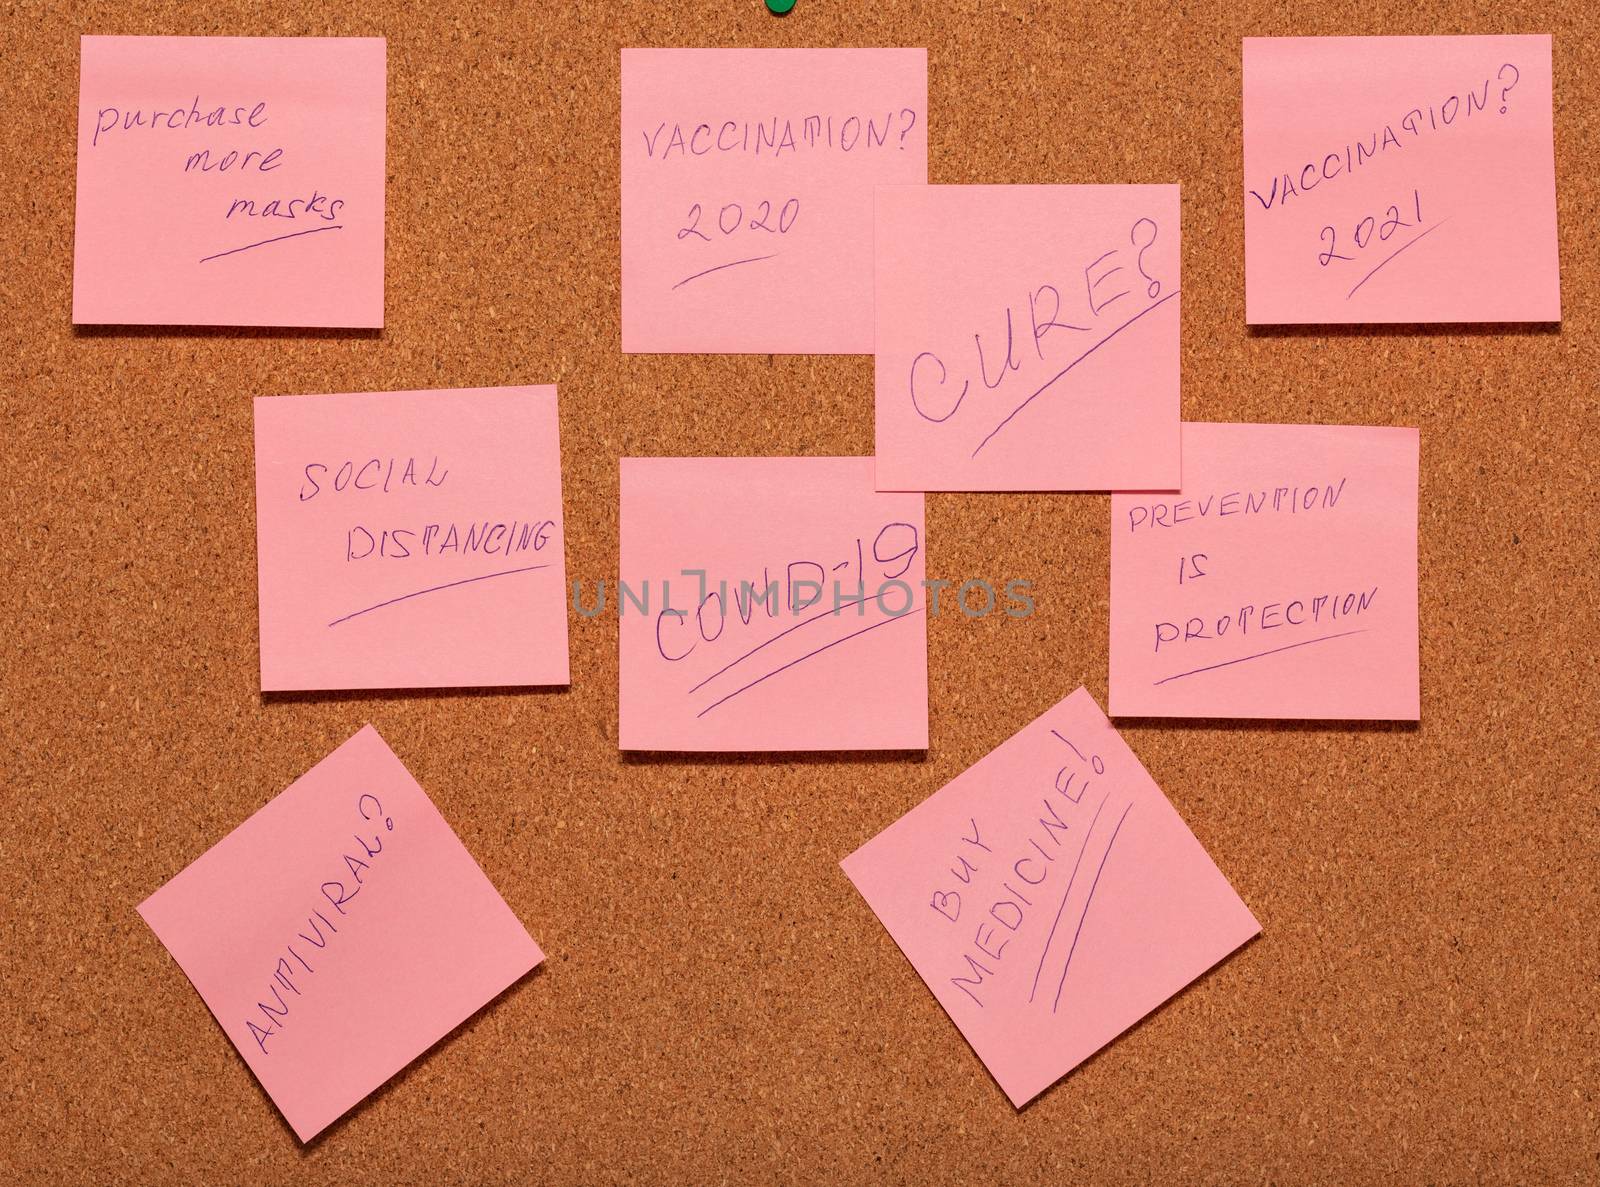 Buy Medicine!, Antiviral?, Vaccination 2021?, Vaccination 2020?, Purchase more masks, Social Distancing, Cure?, Prevention is Protection, Covid-19 words on pink stickers across a cork notice-board by DamantisZ